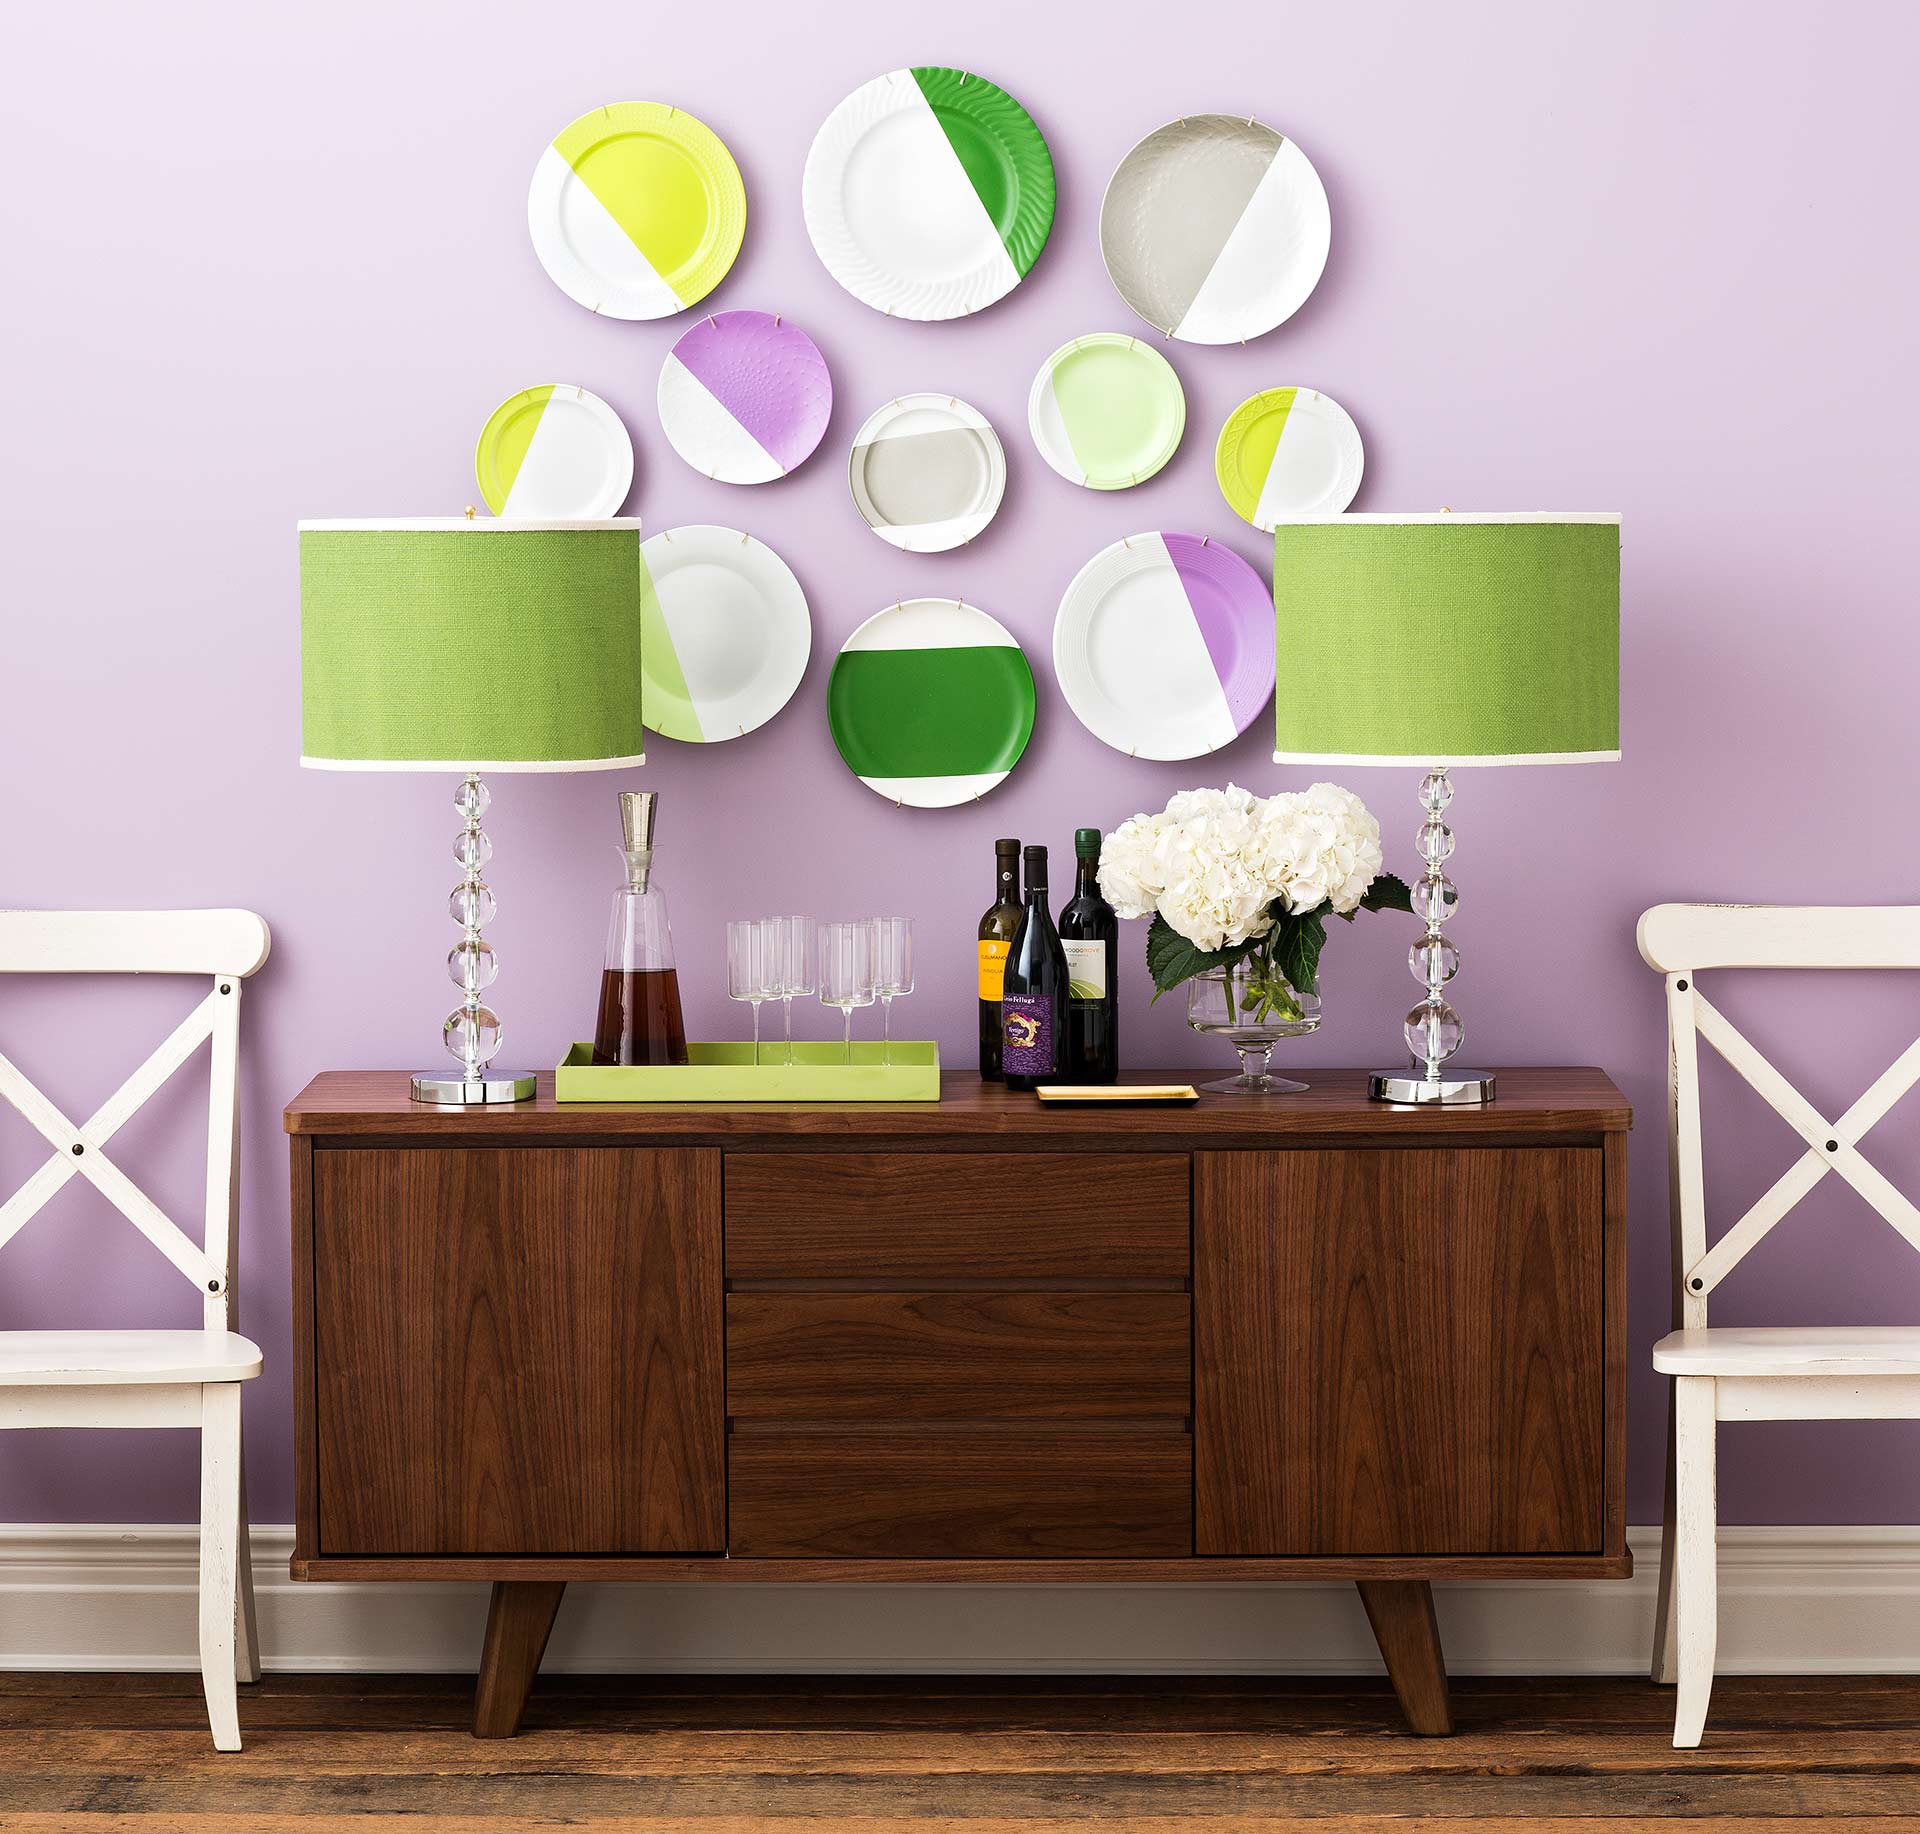 Purple wall graphic interior photograph with painted plates